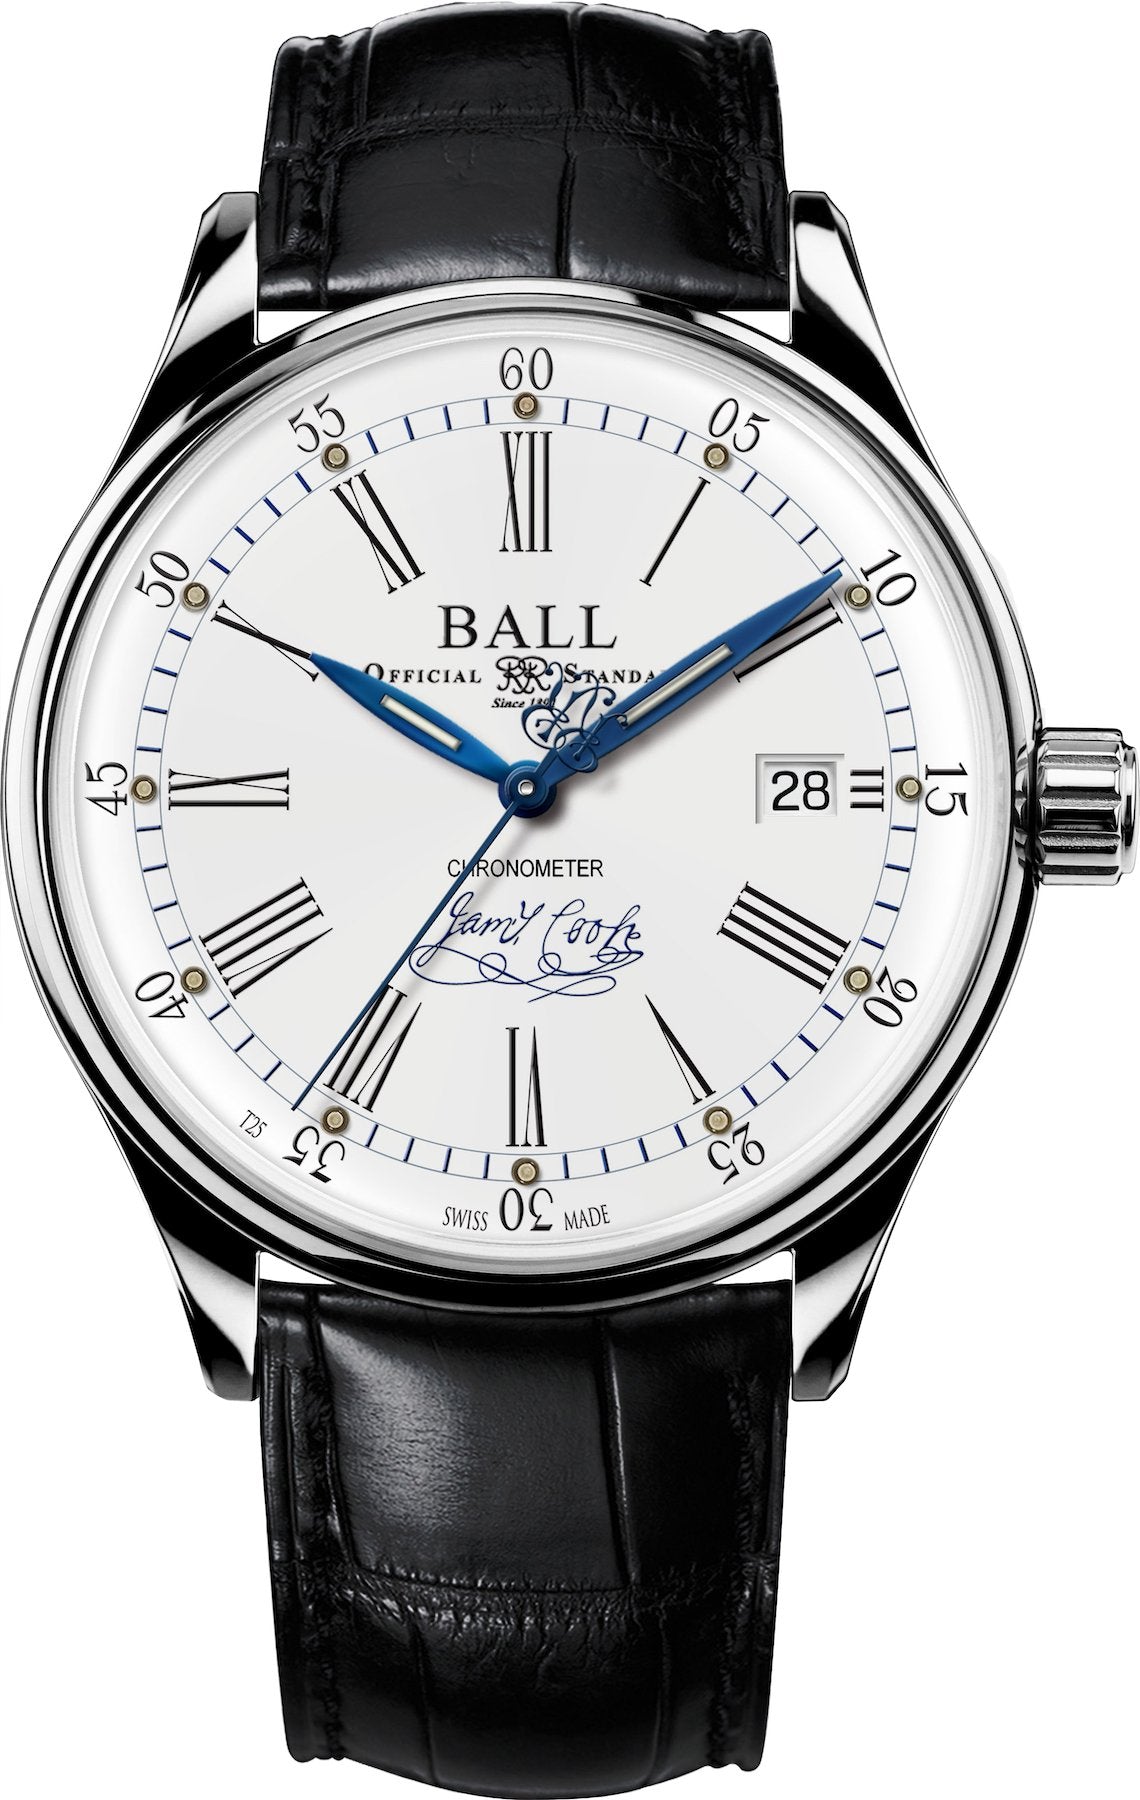 Ball Watch Company Trainmaster Endeavour Chronometer Aligator Limited Edition